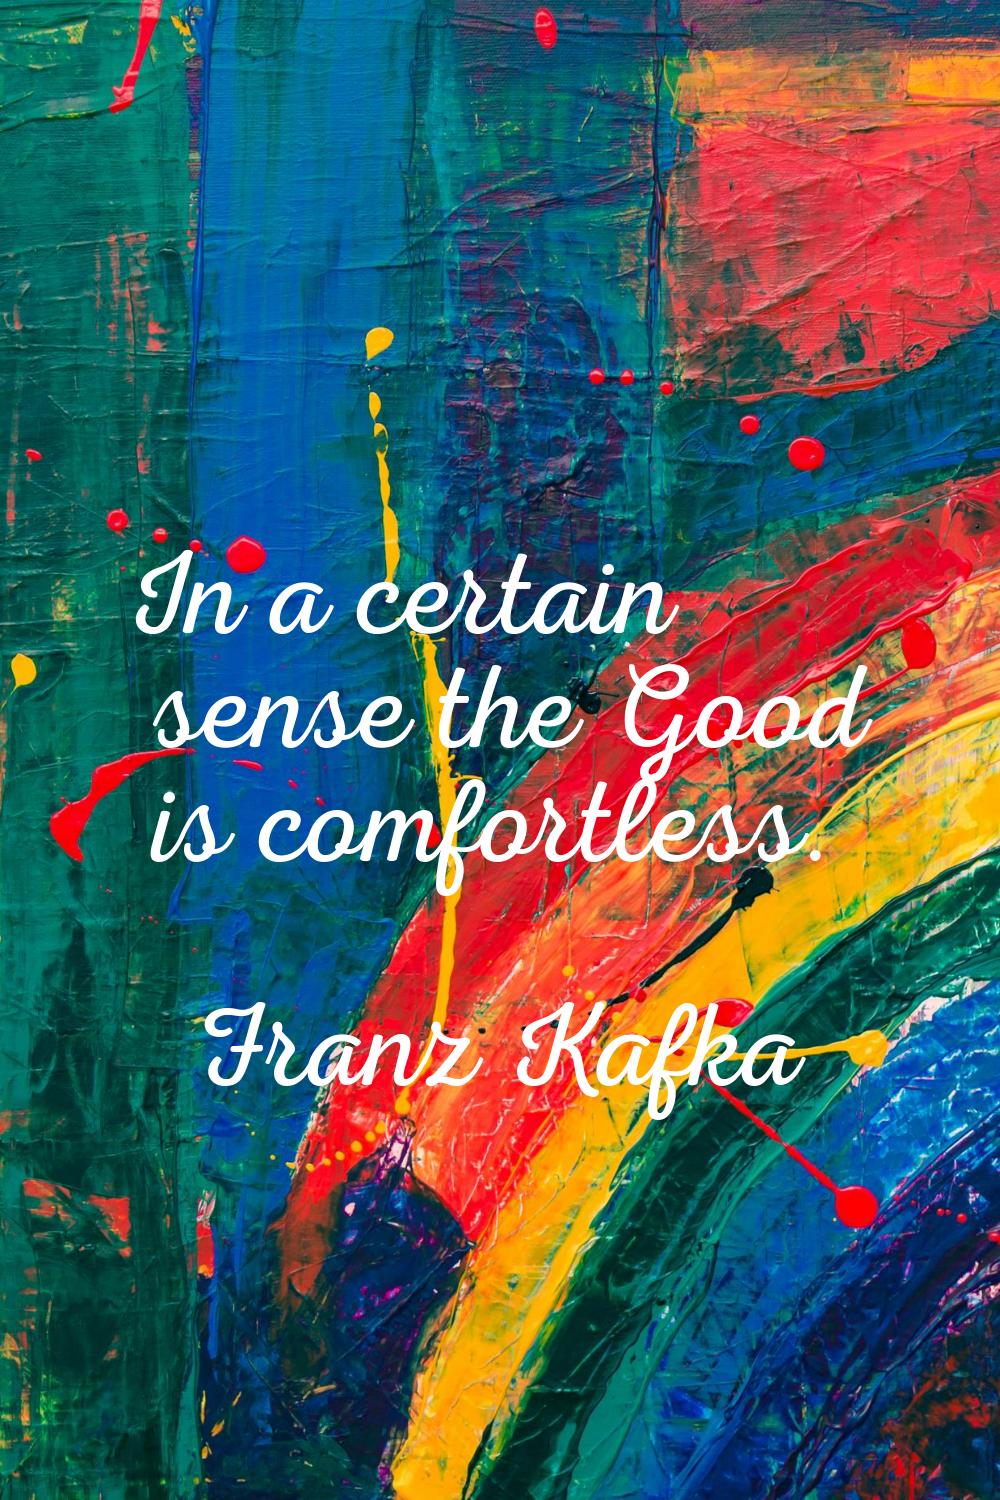 In a certain sense the Good is comfortless.